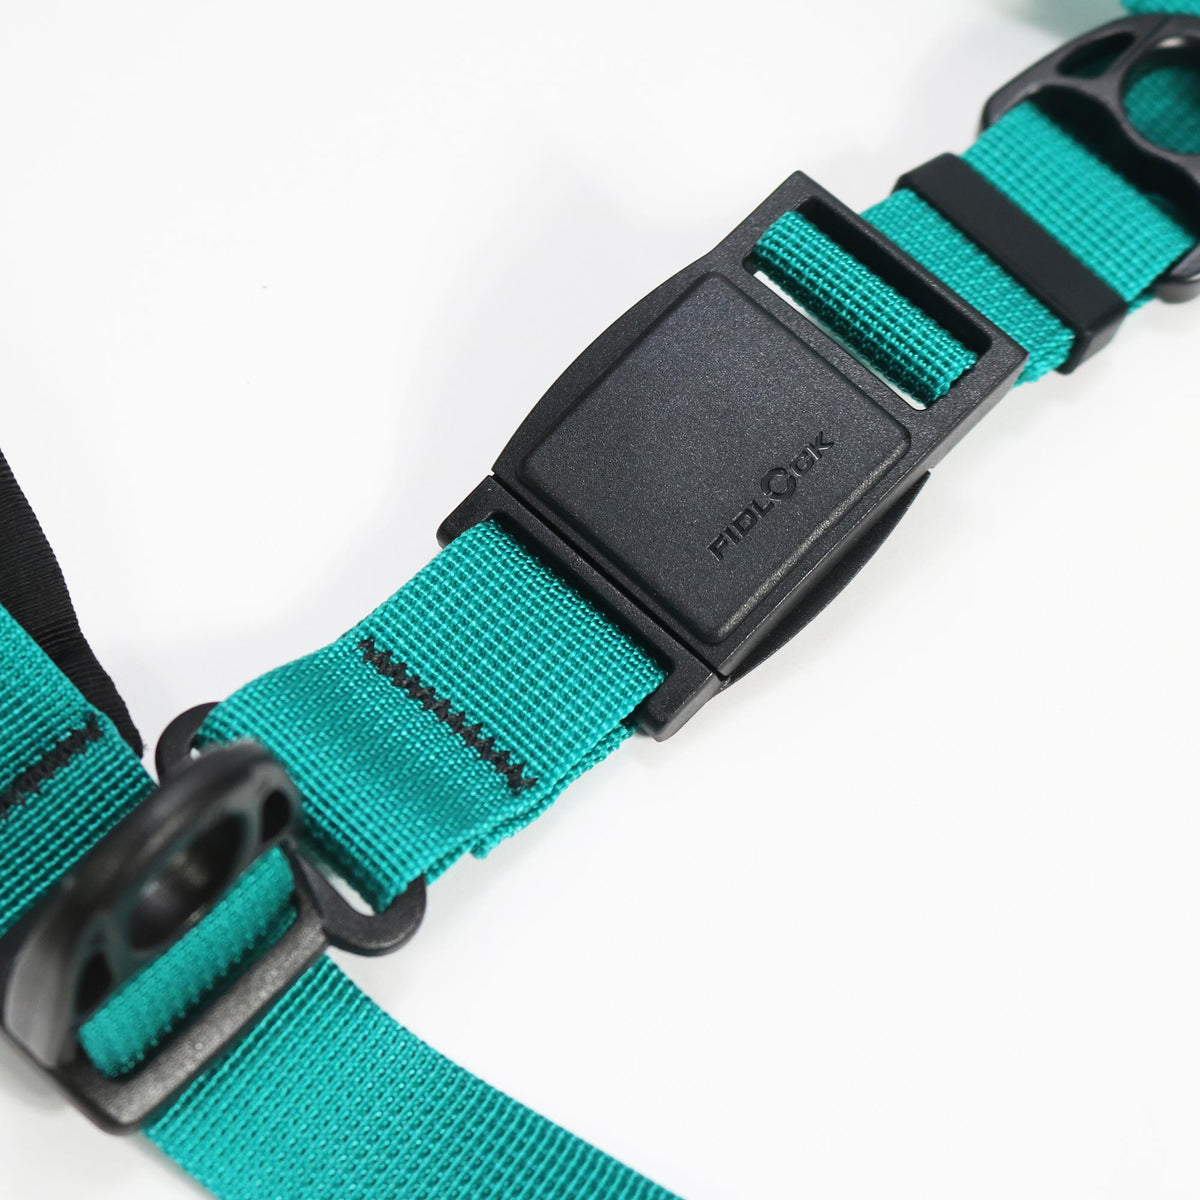 skingrowsback 3point cycling camera strap teal made in australia